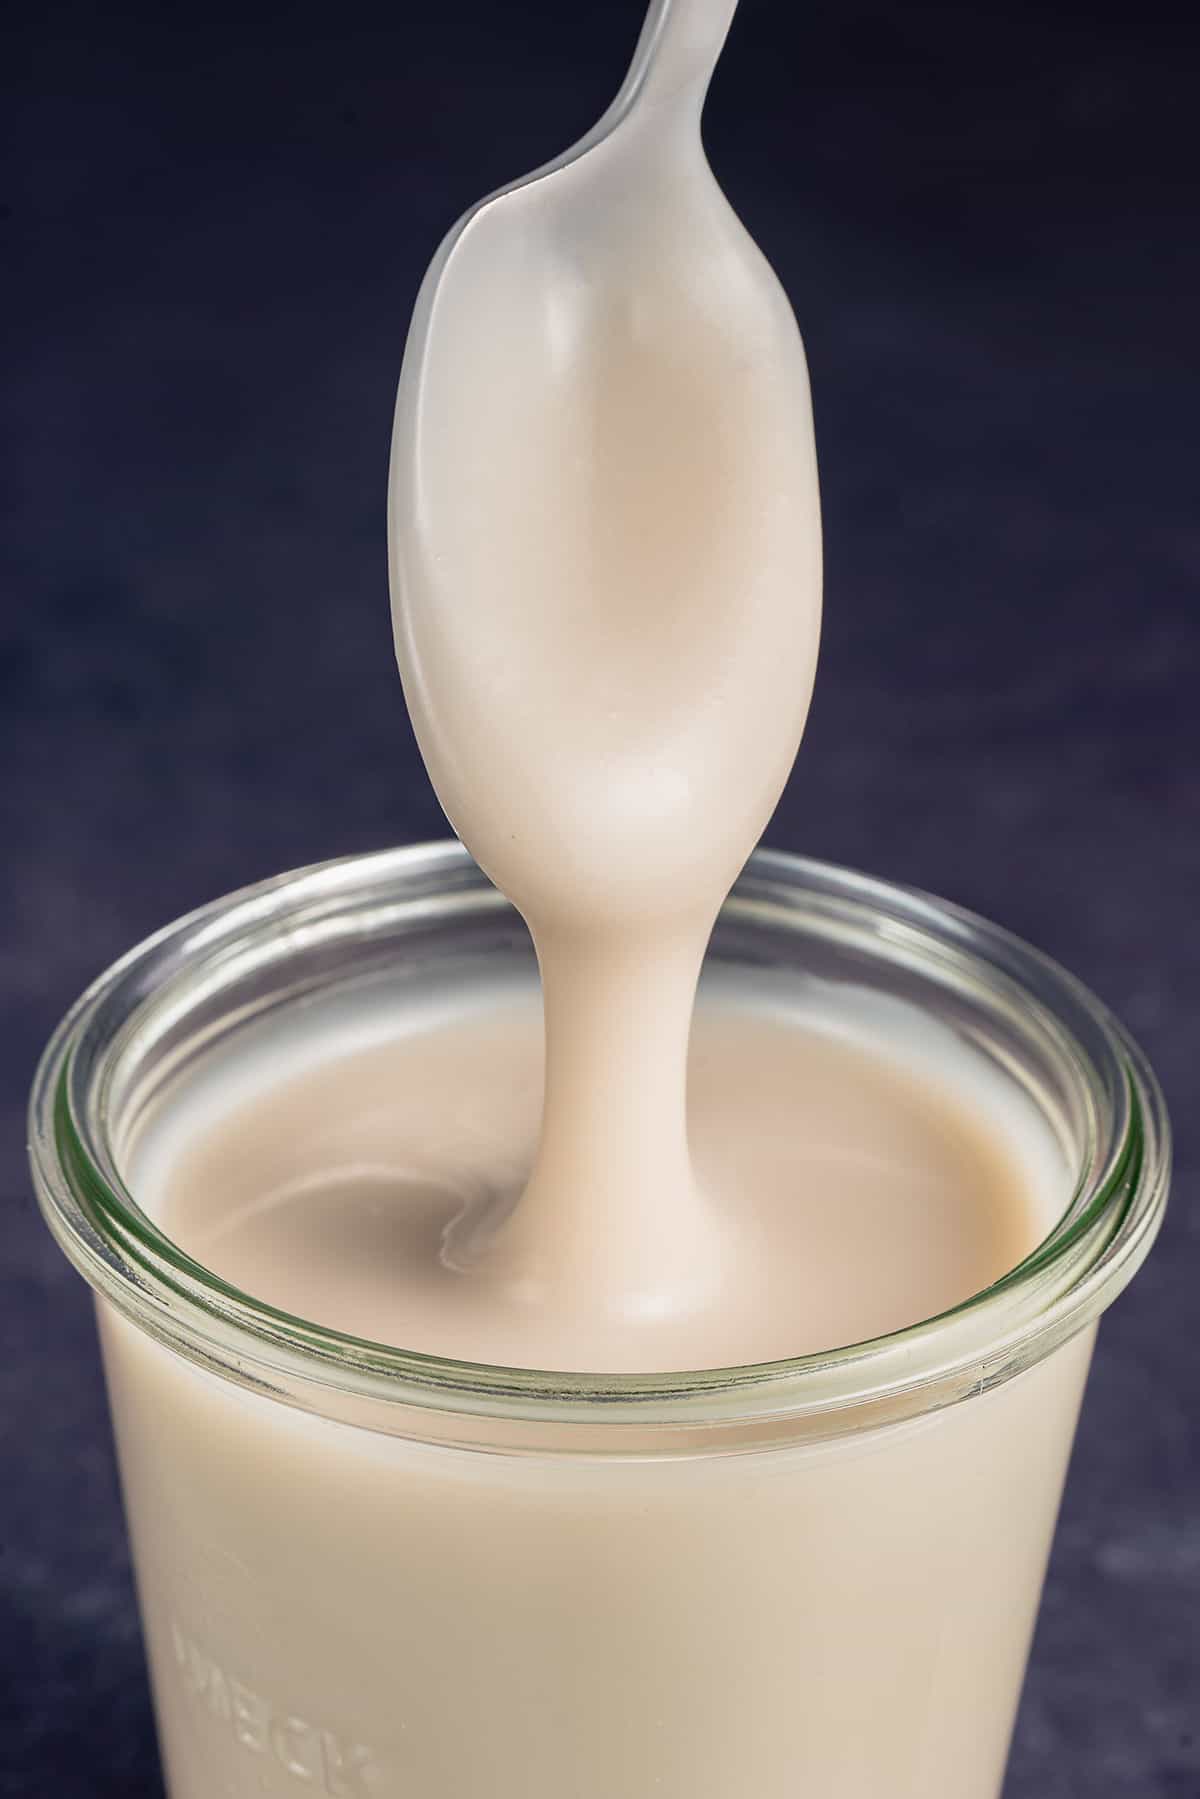 a spoonful of condensed milk dripping back into jar